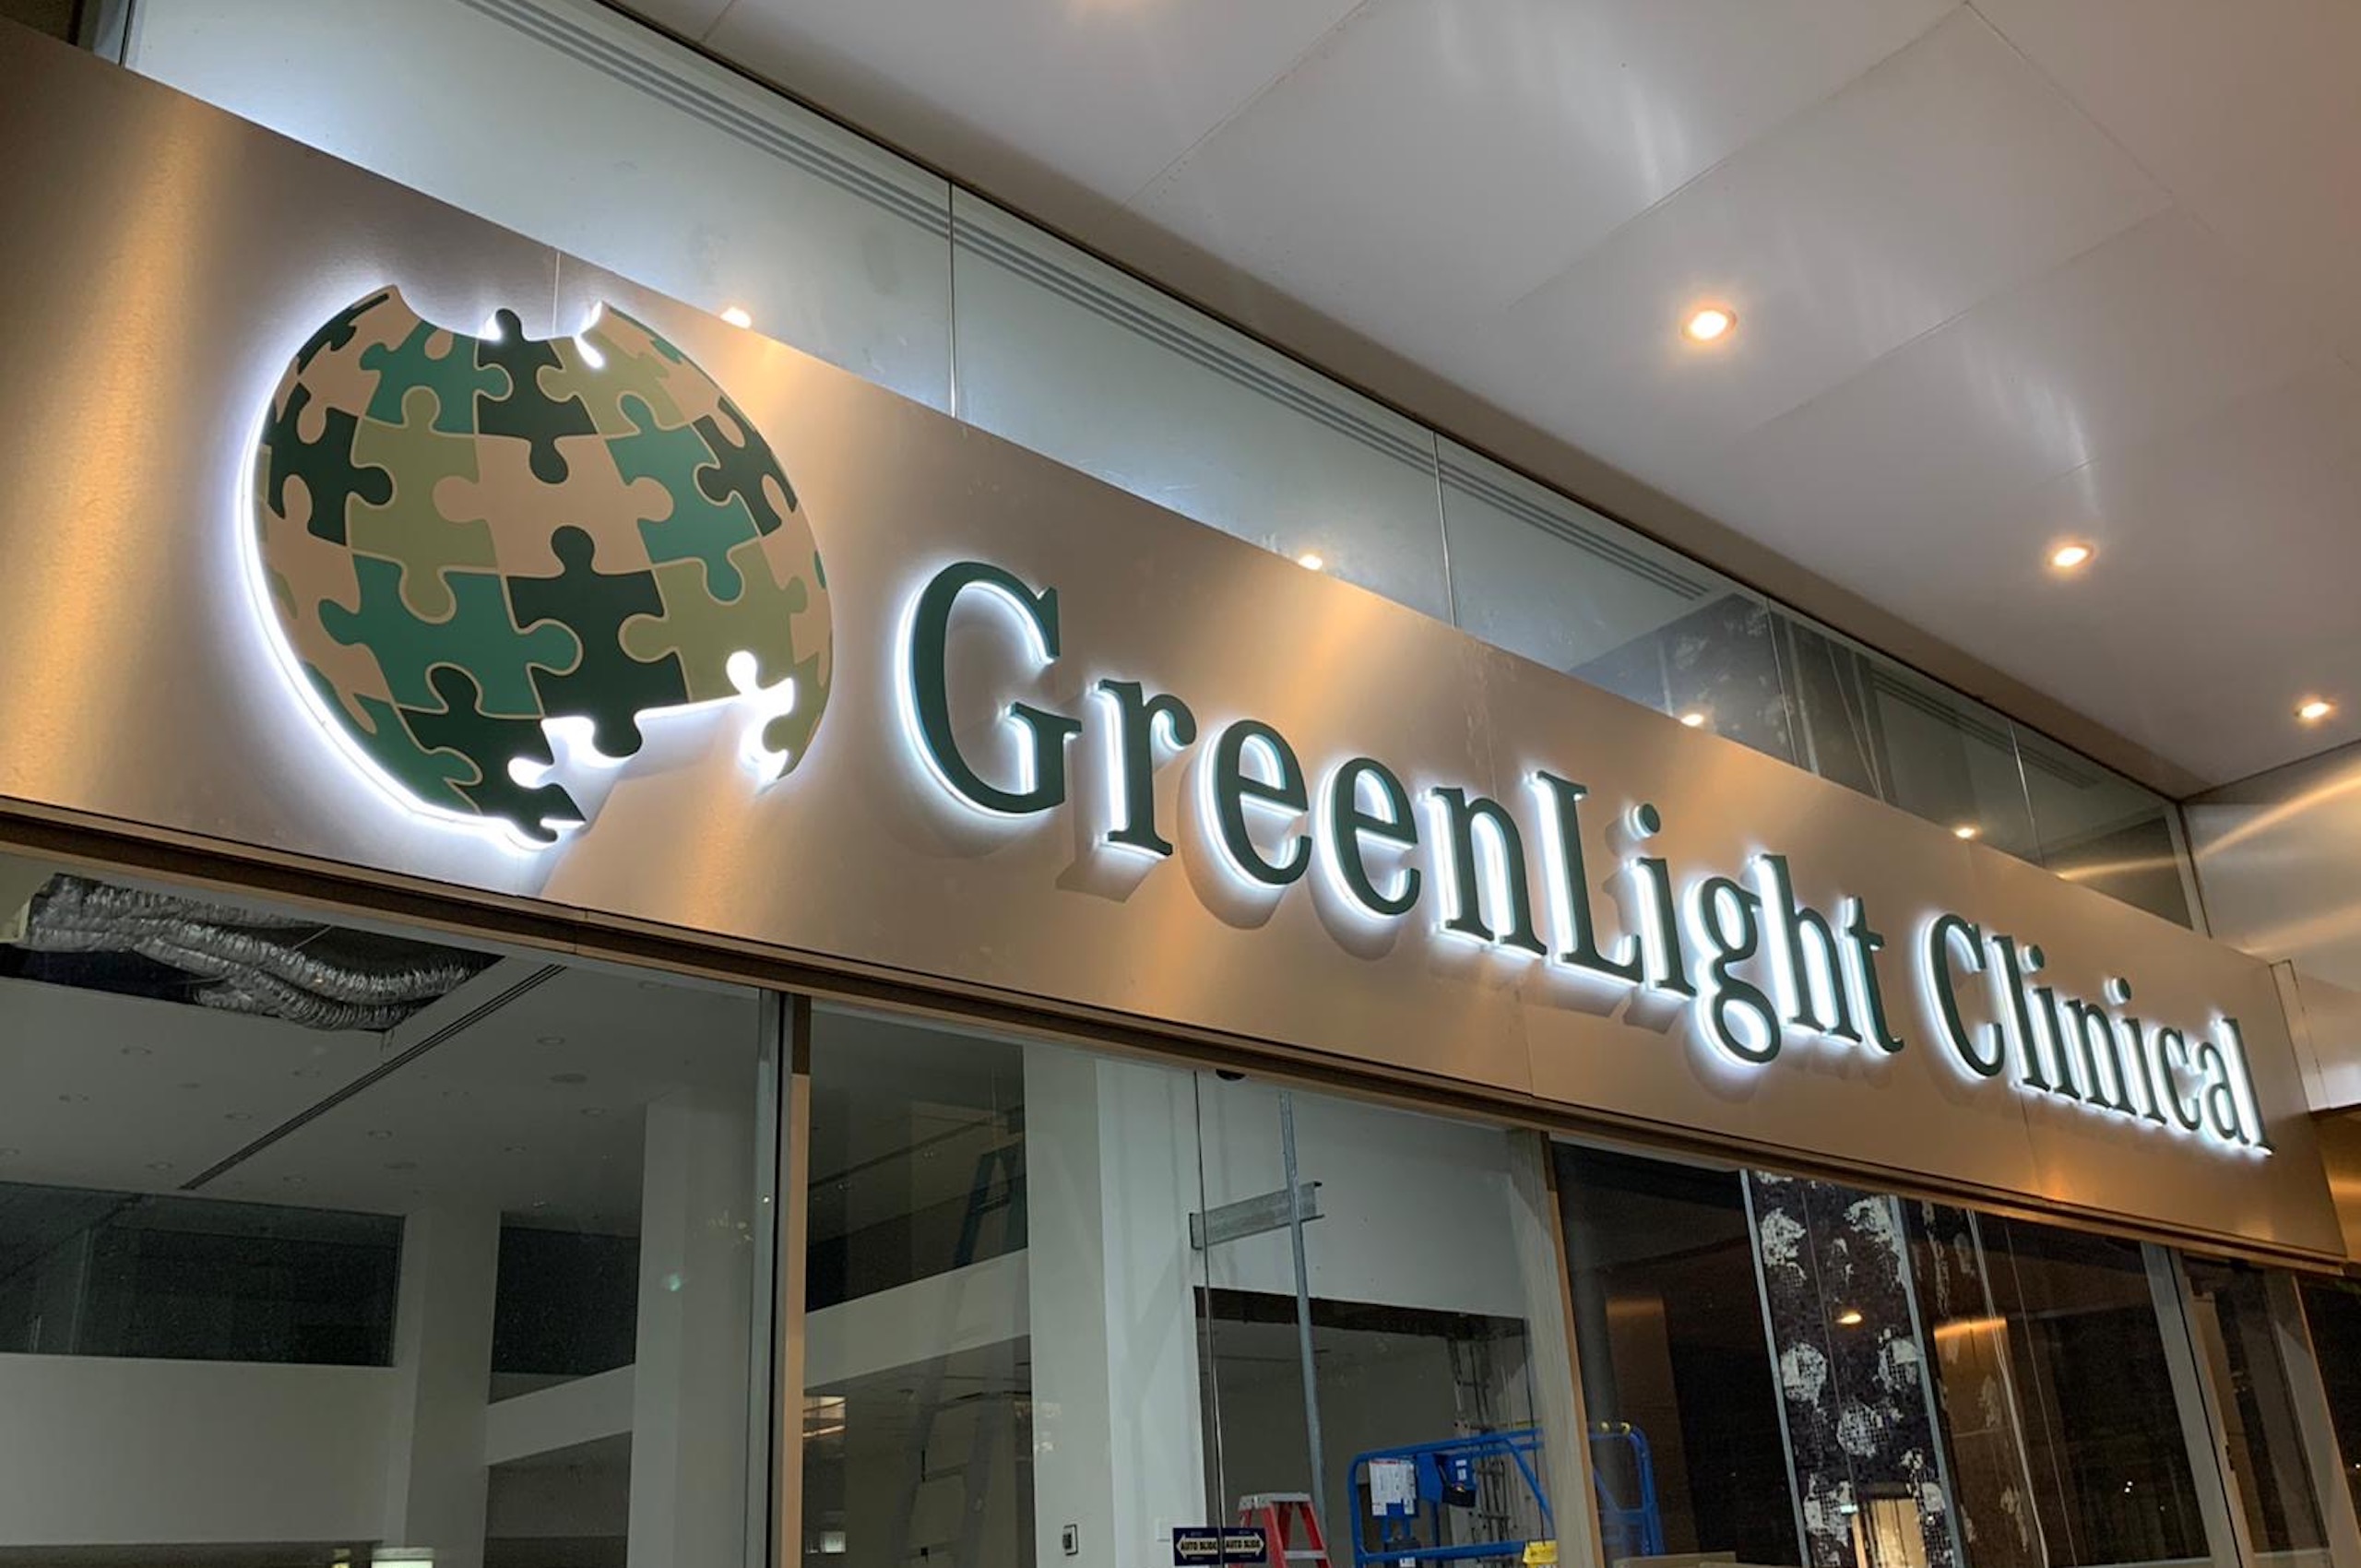 Shop Signs - Greenlight Clinical